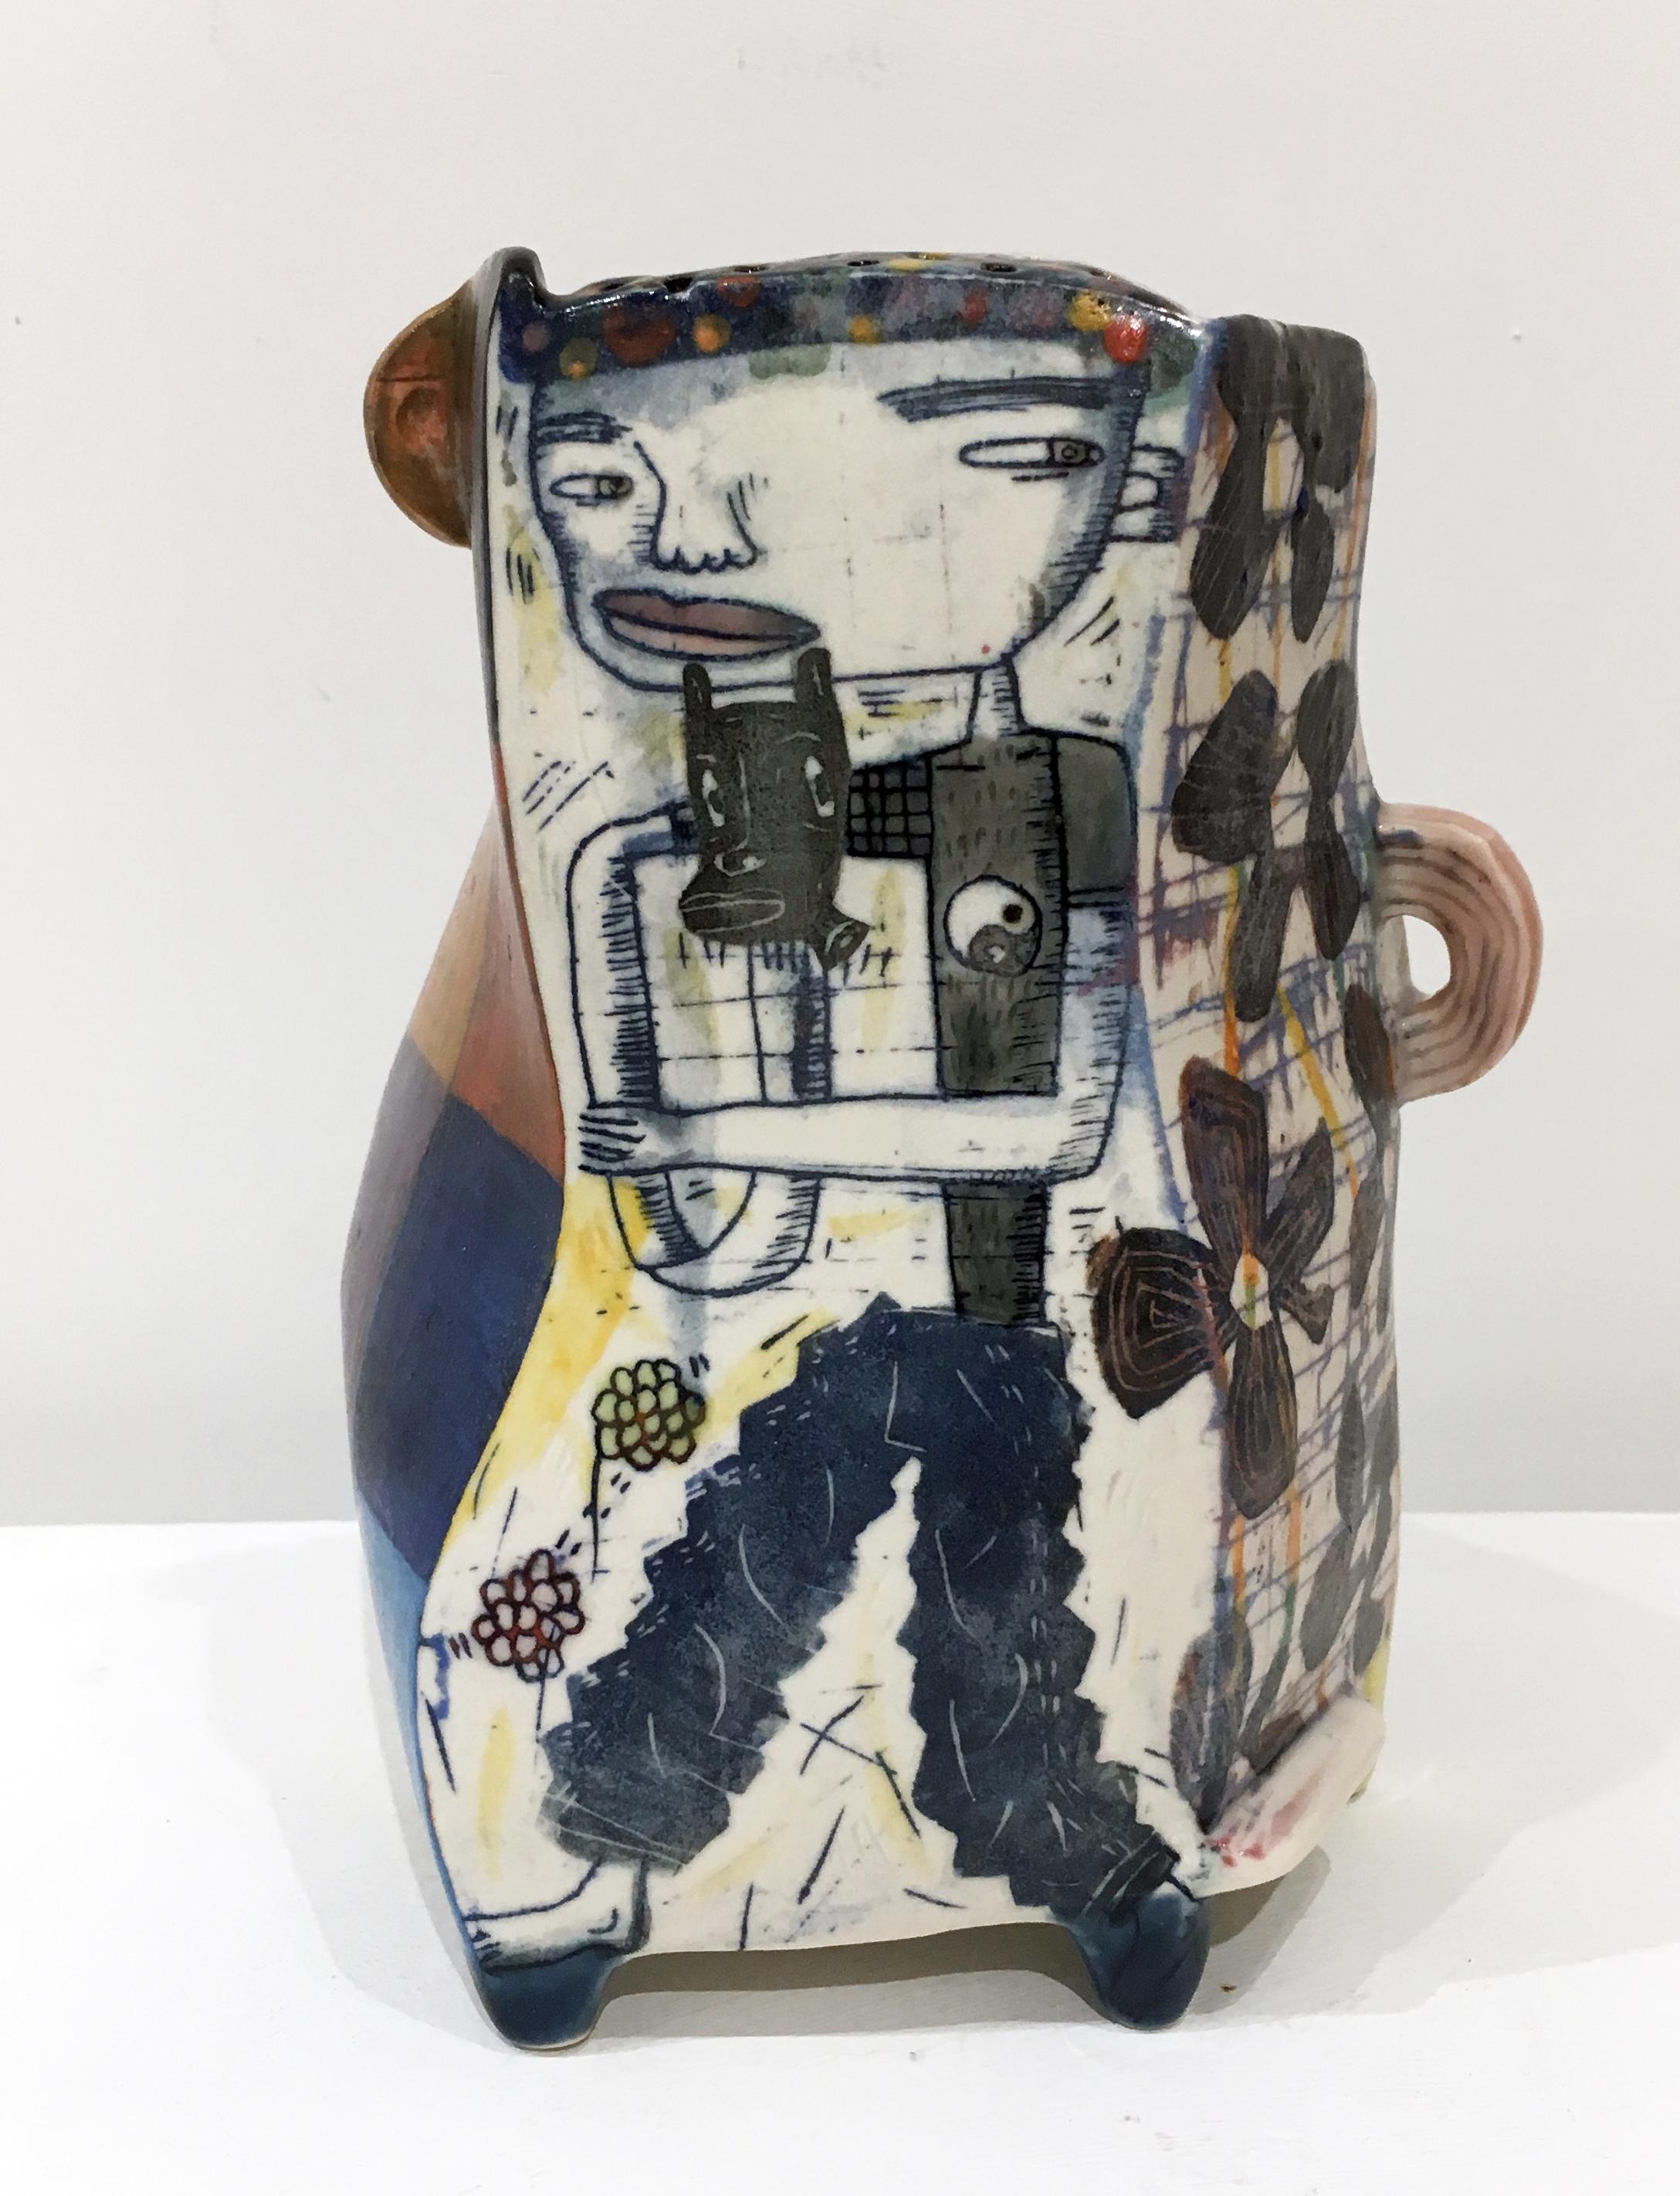 Kevin Snipes Figurative Sculpture - "Super Bad", Abstract Porcelain Sculpture with Surface Illustration and Glaze